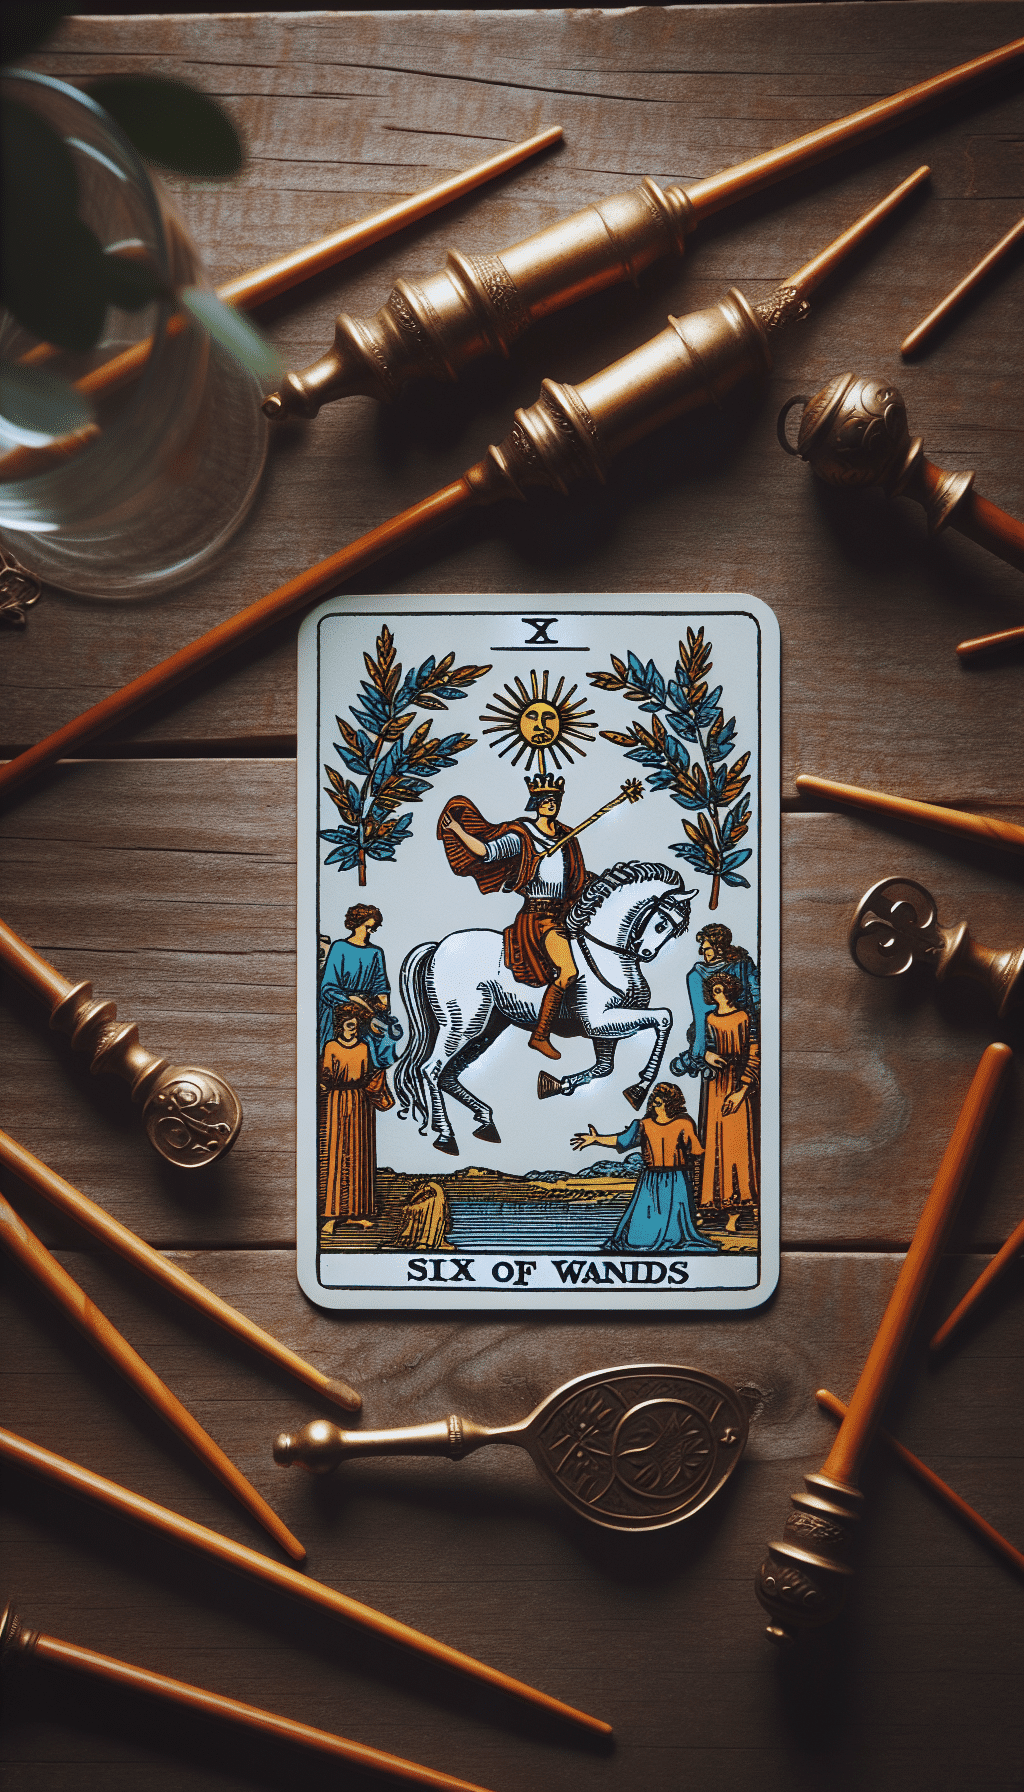 The Triumph of the Six of Wands: A Symbol of Success and Recognition